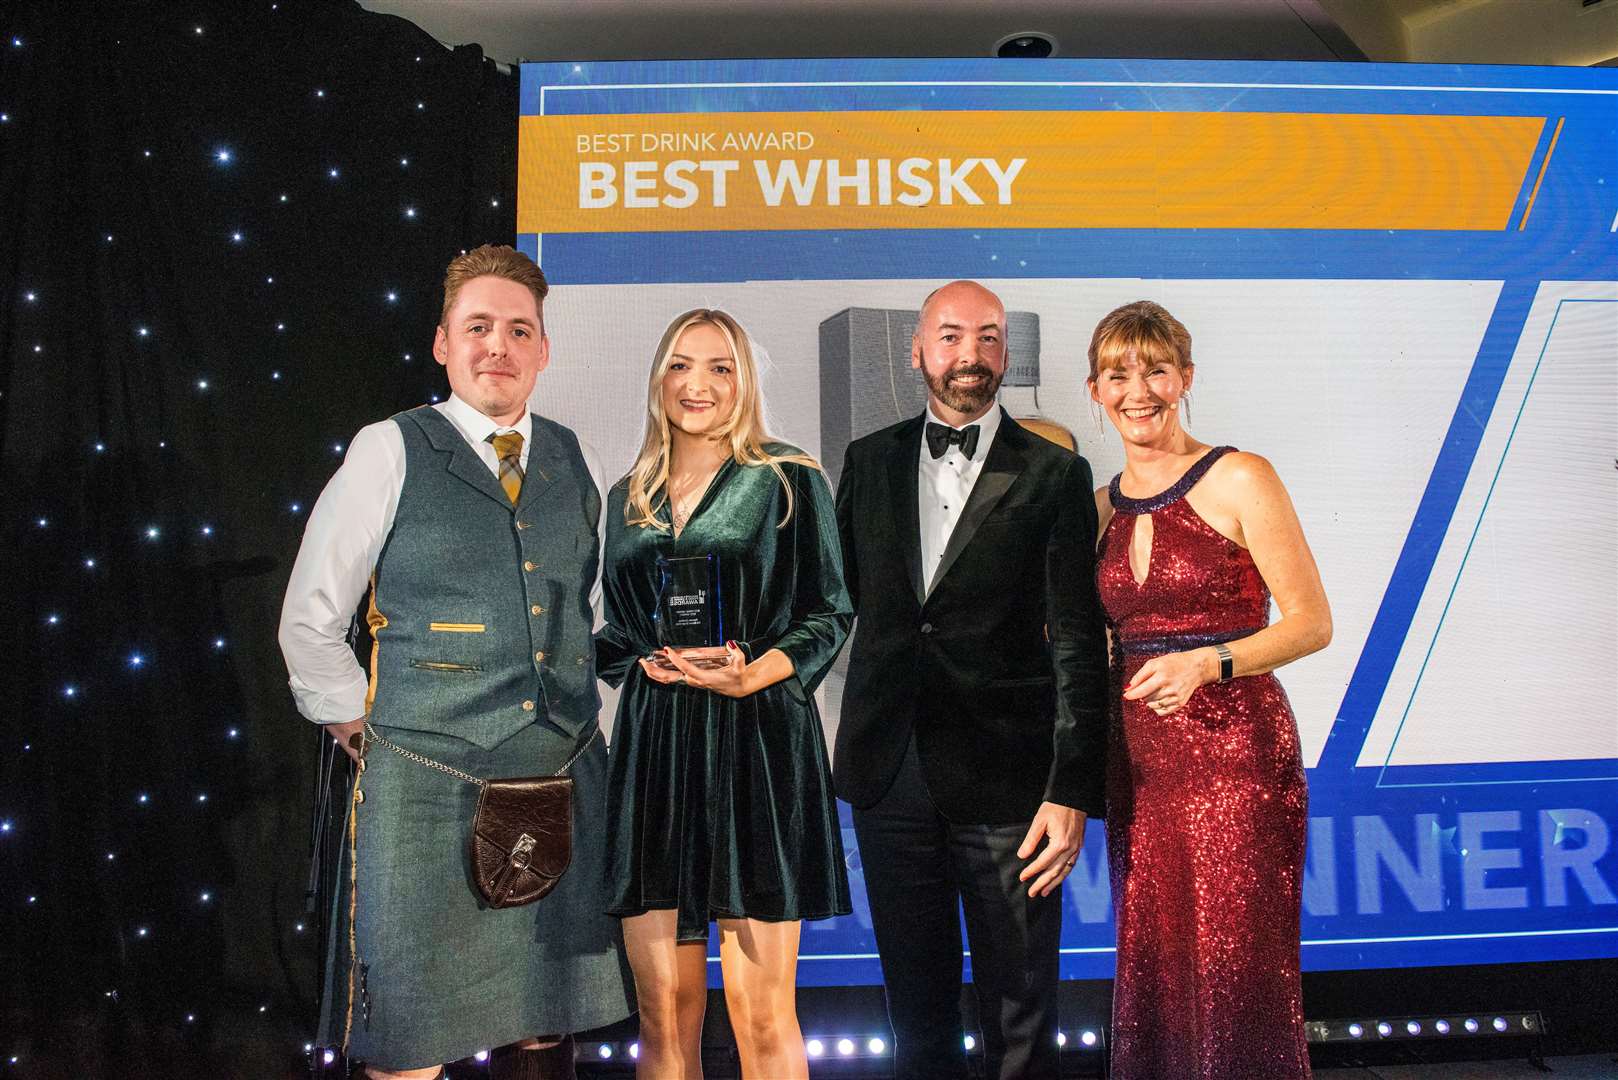 Julia Mackillop and Scott Adamson from Tomatin distillery collecting the Best Whisky award for Cu Bocan single malt. Pictures: Chris Watt Photography.